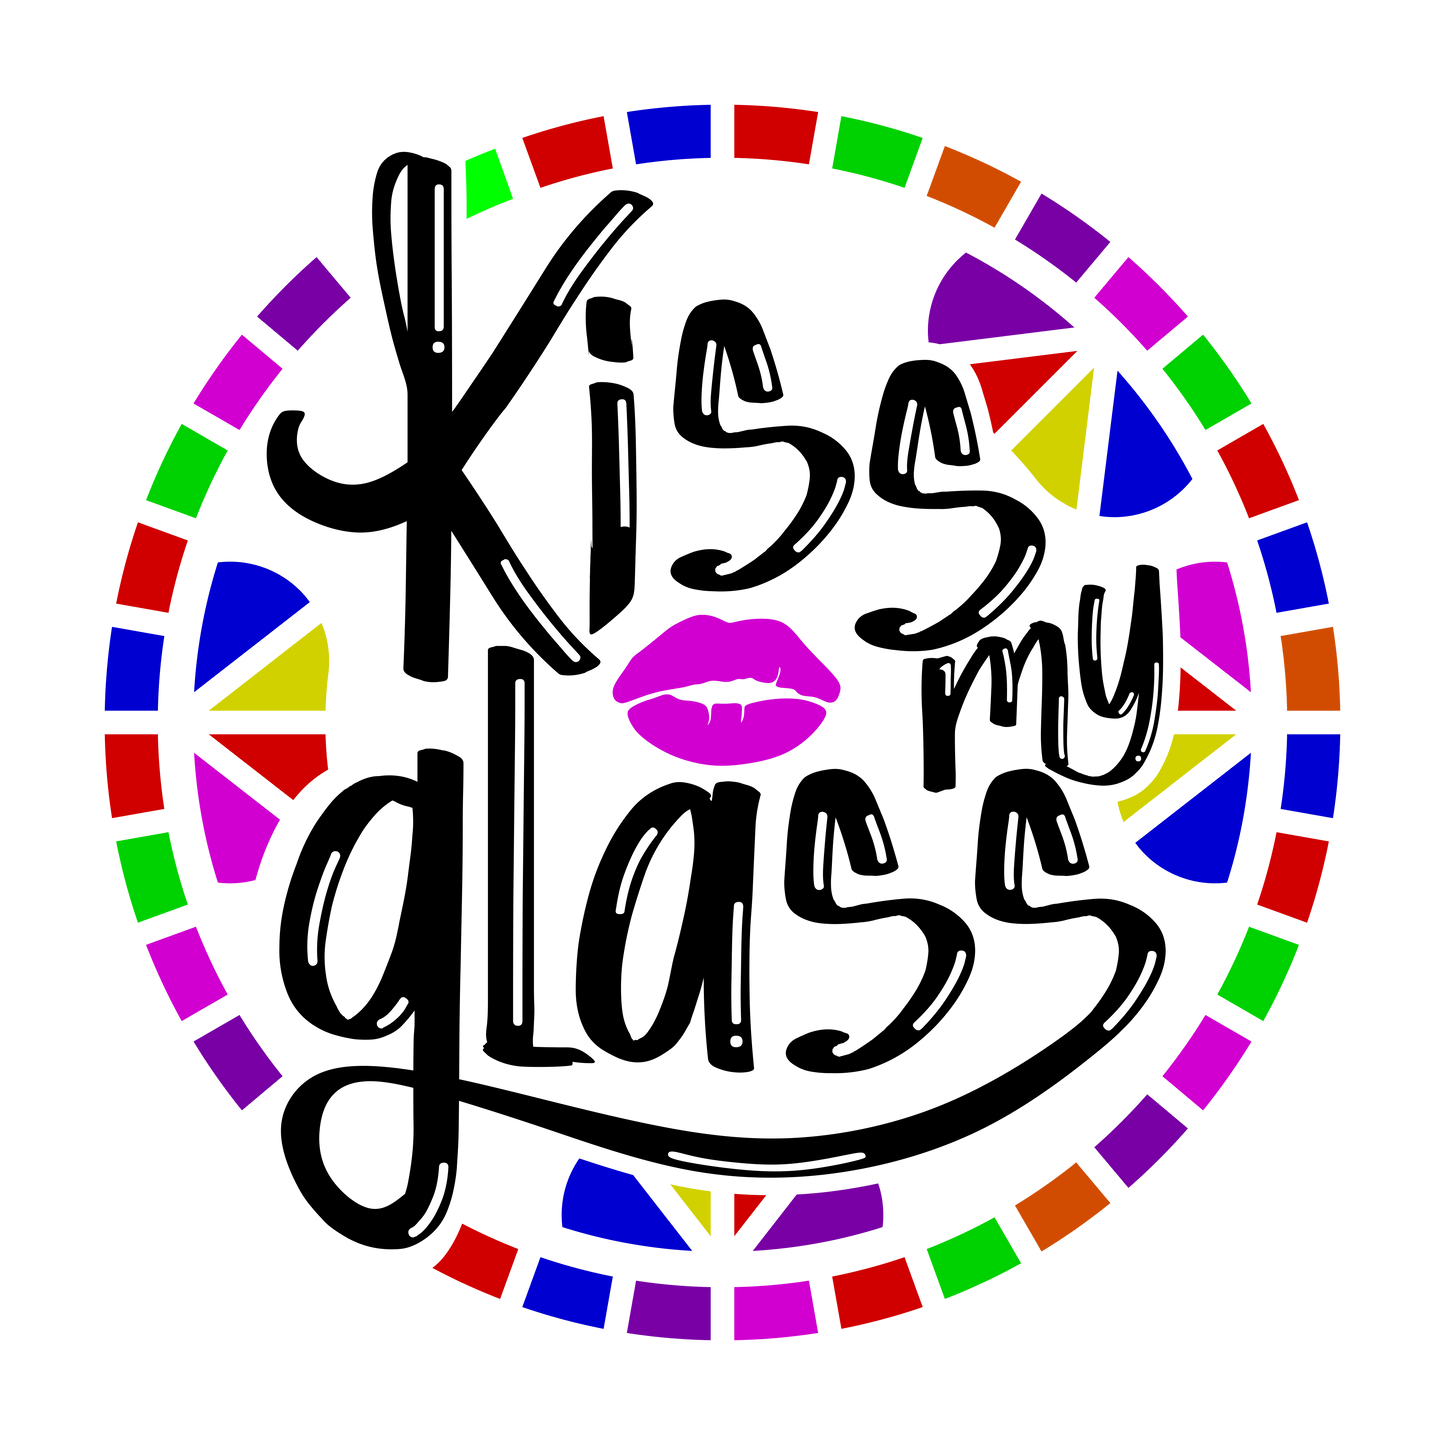 Fuse Muse Fused Glass Apparel, Etc... Kiss My Glass - White Short-Sleeve Unisex T-Shirt